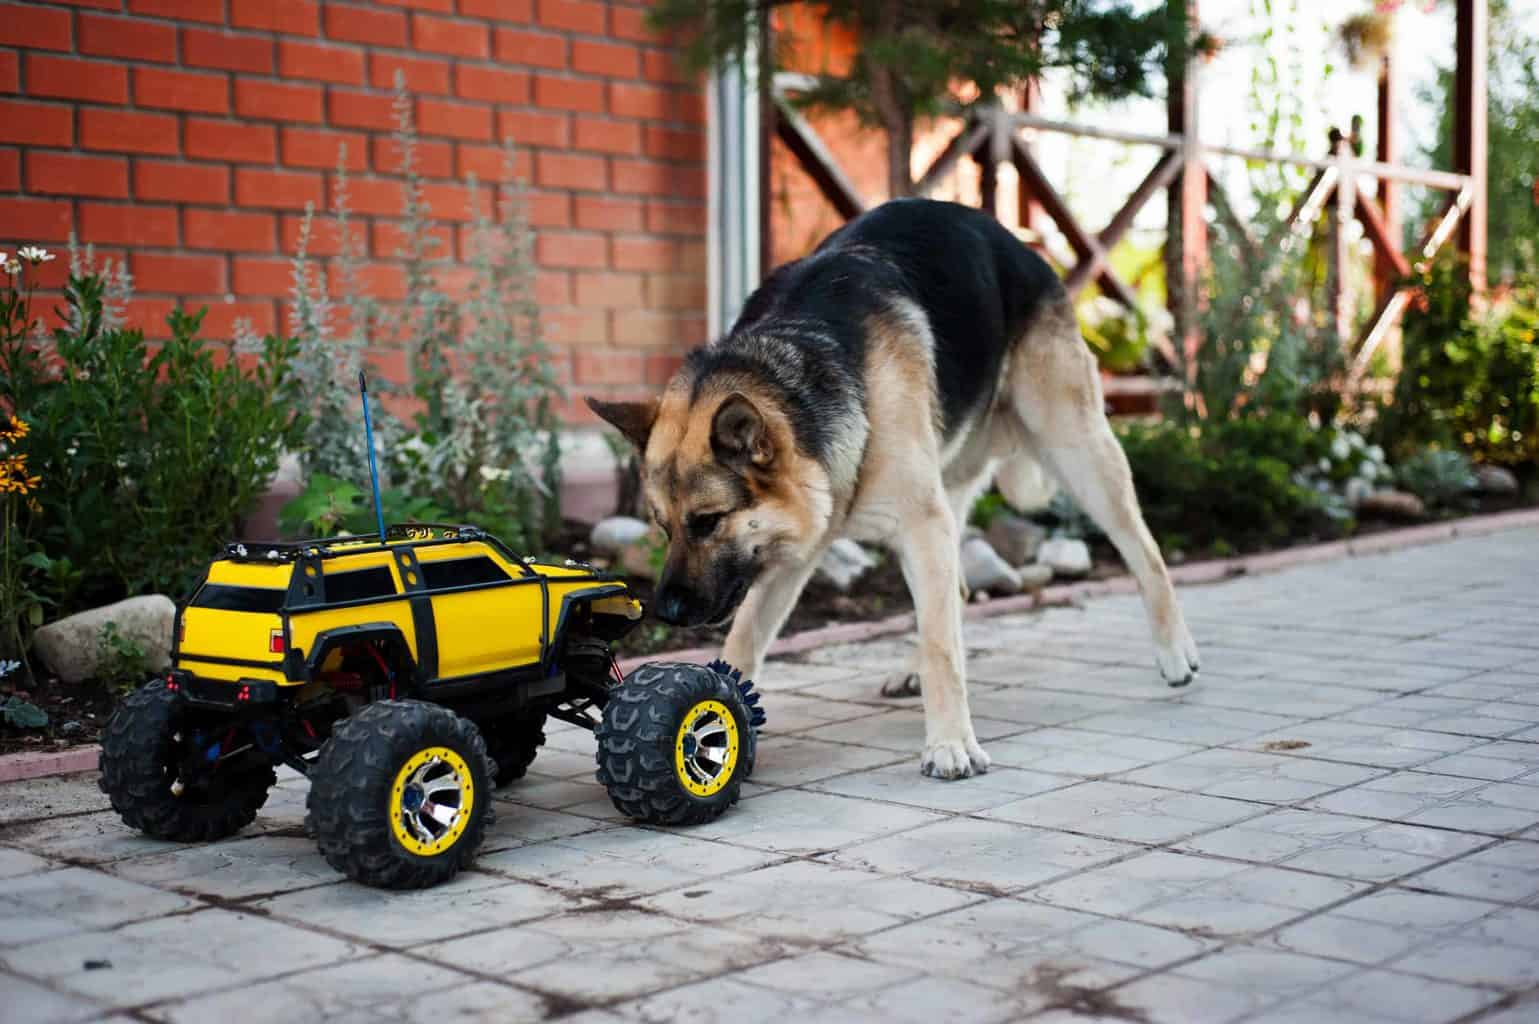 German Shepherd plays with RC car. A durable RC car can be a fun way to entertain both your dog and your child -- while keeping them out of trouble in the process.